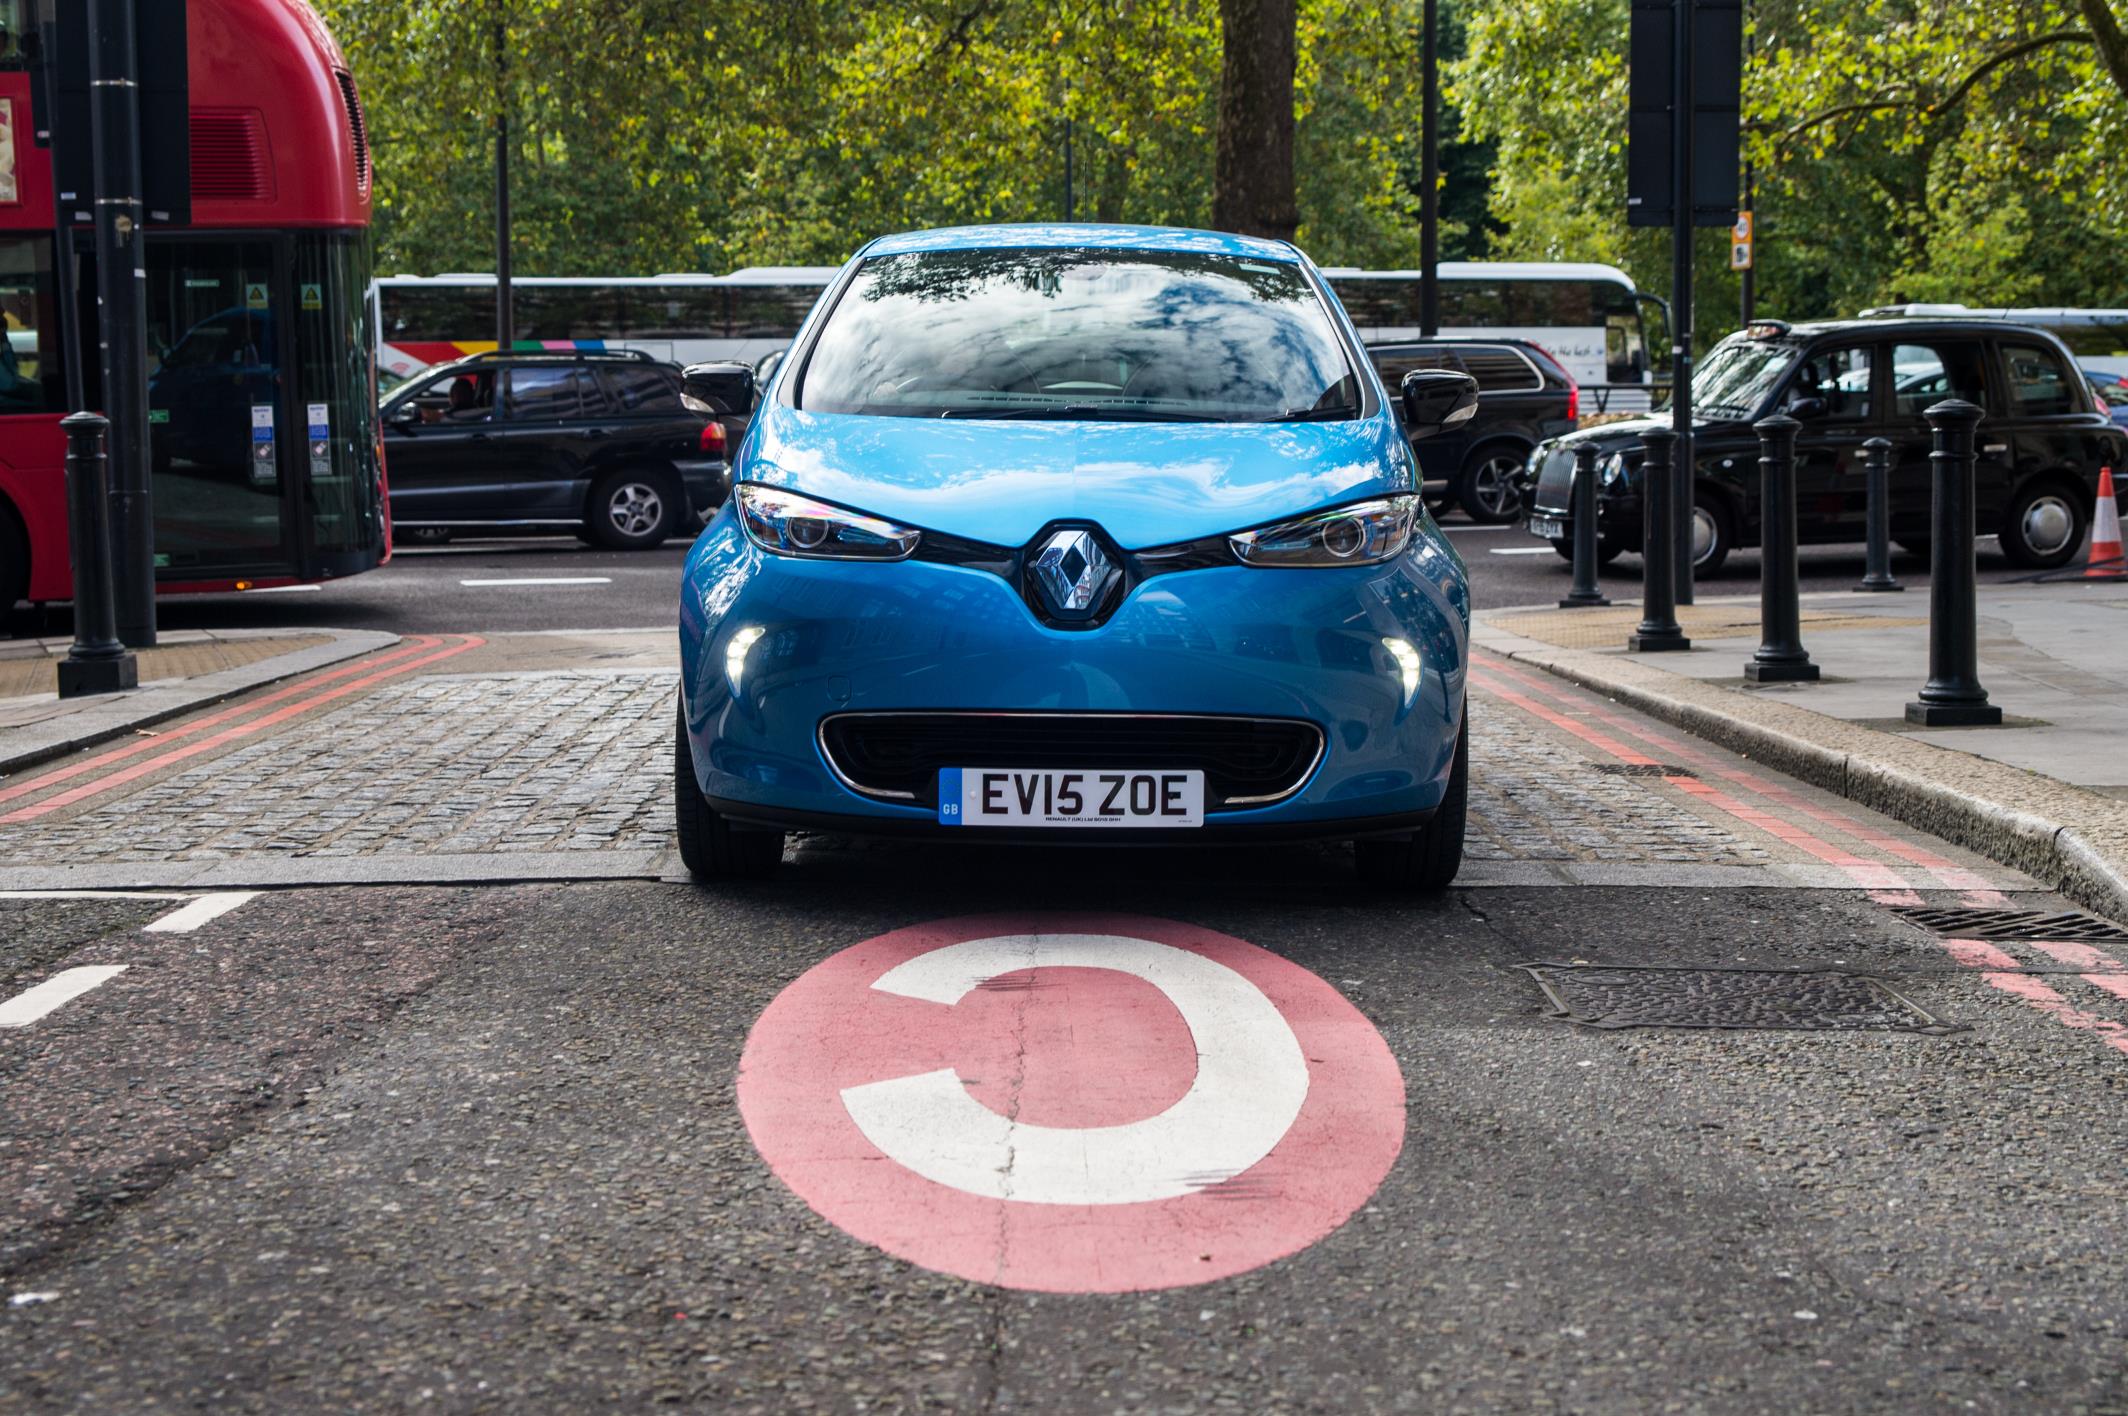 Renault Zoe is one of the the best cars to avoid paying road tax (VED)